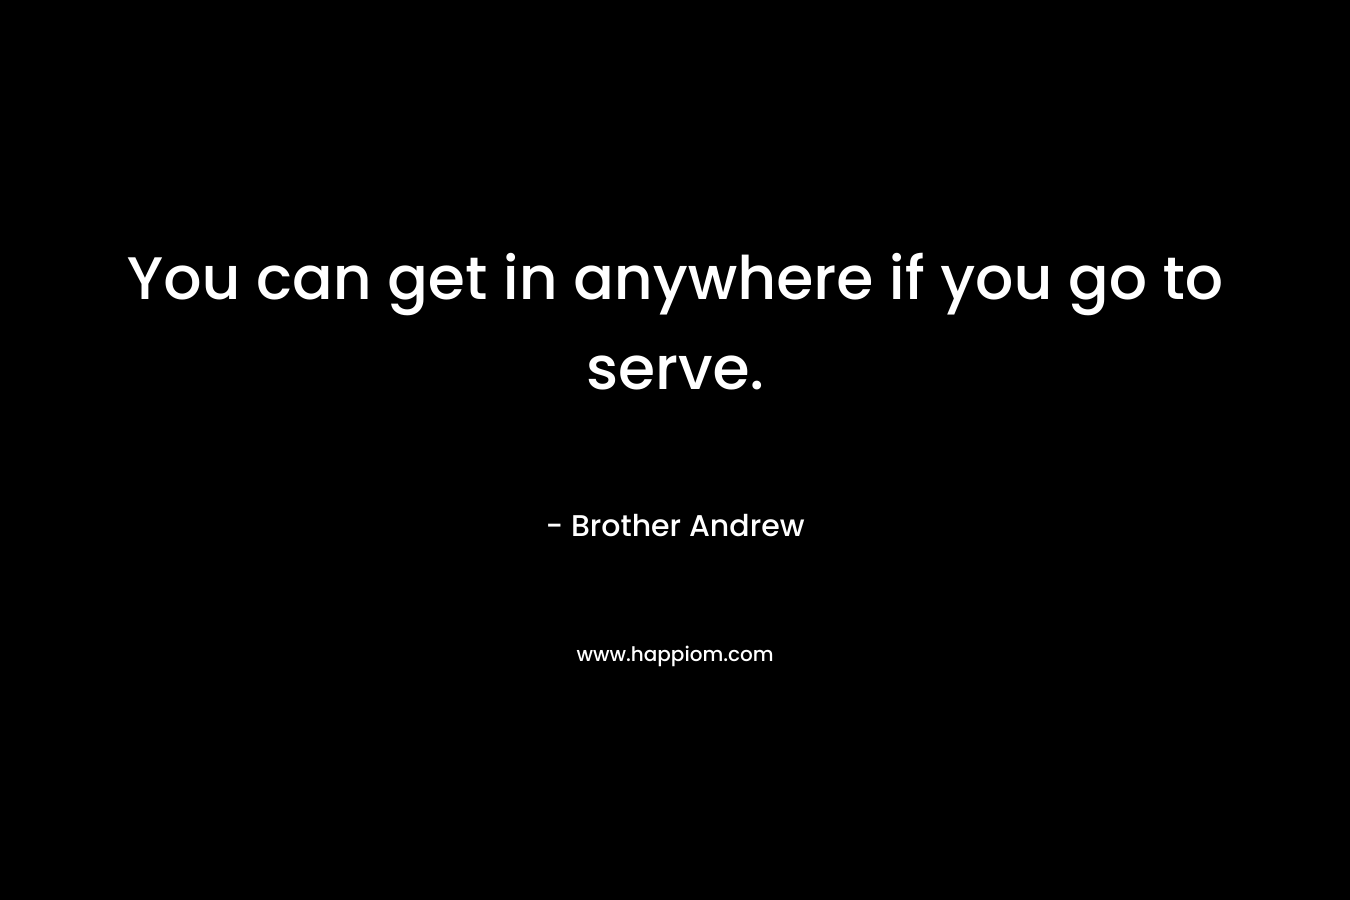 You can get in anywhere if you go to serve.